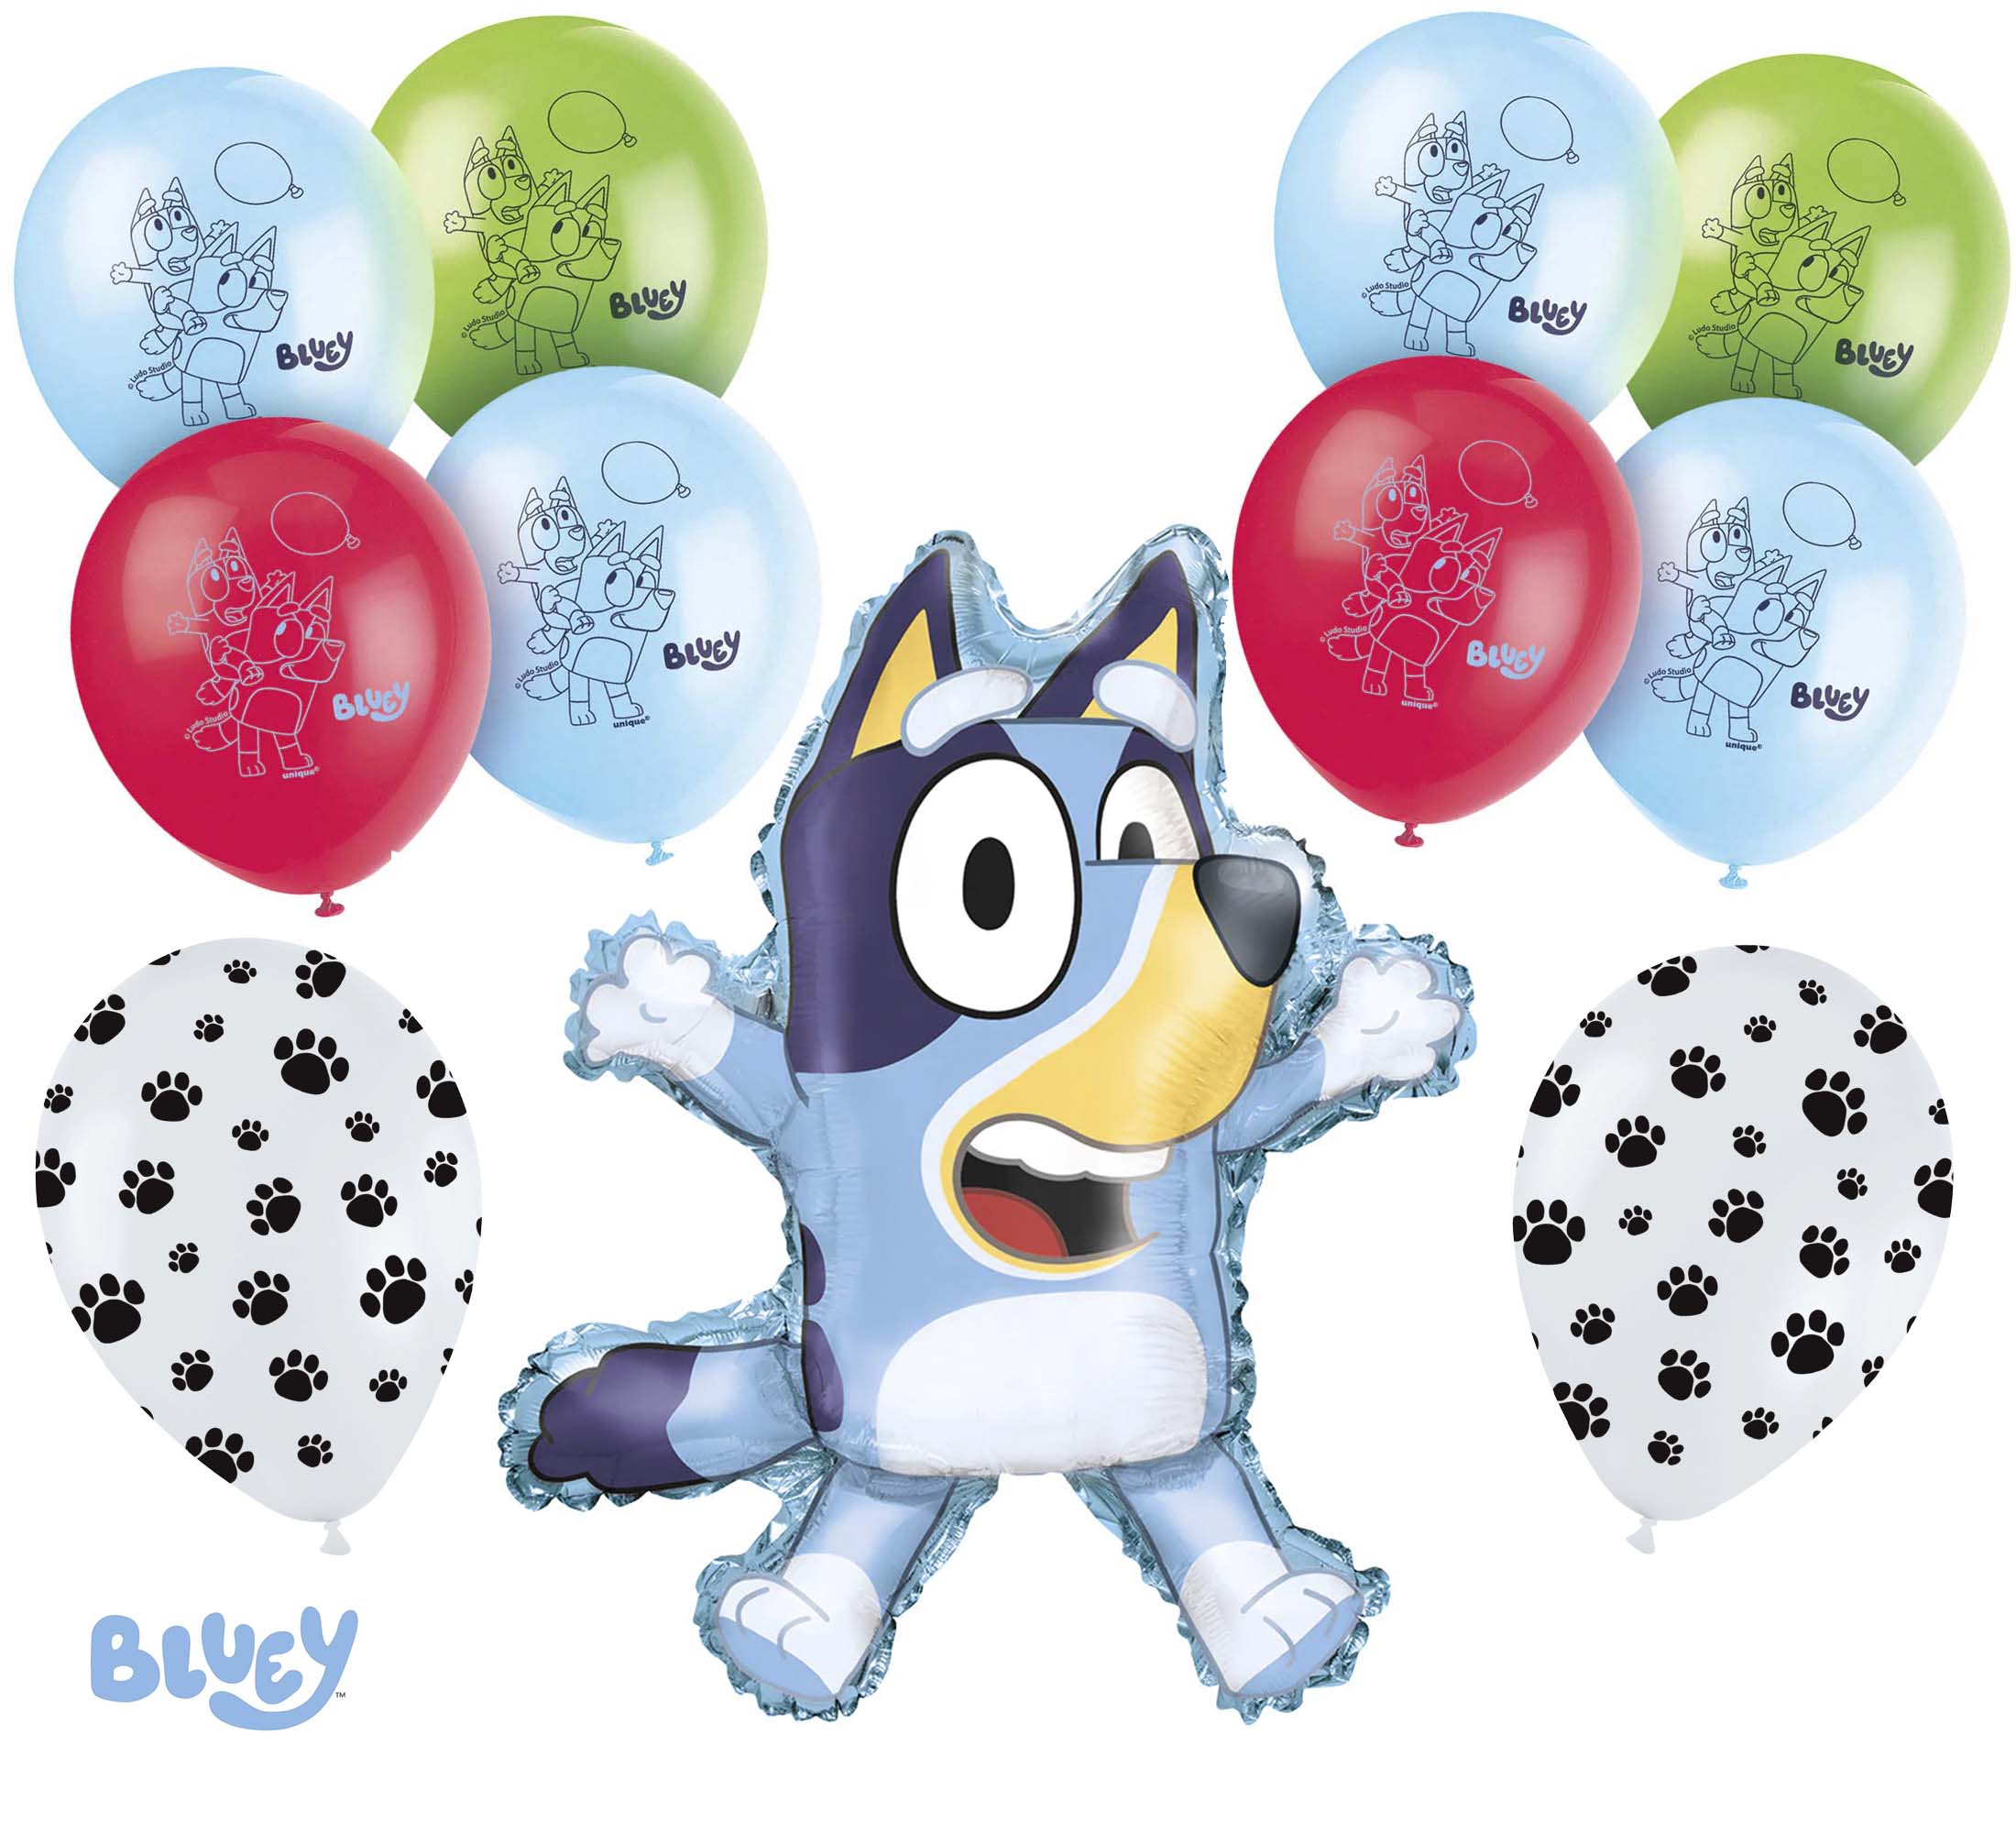 Bluey Birthday Party Supplies Party Supplies Canada - Open A Party